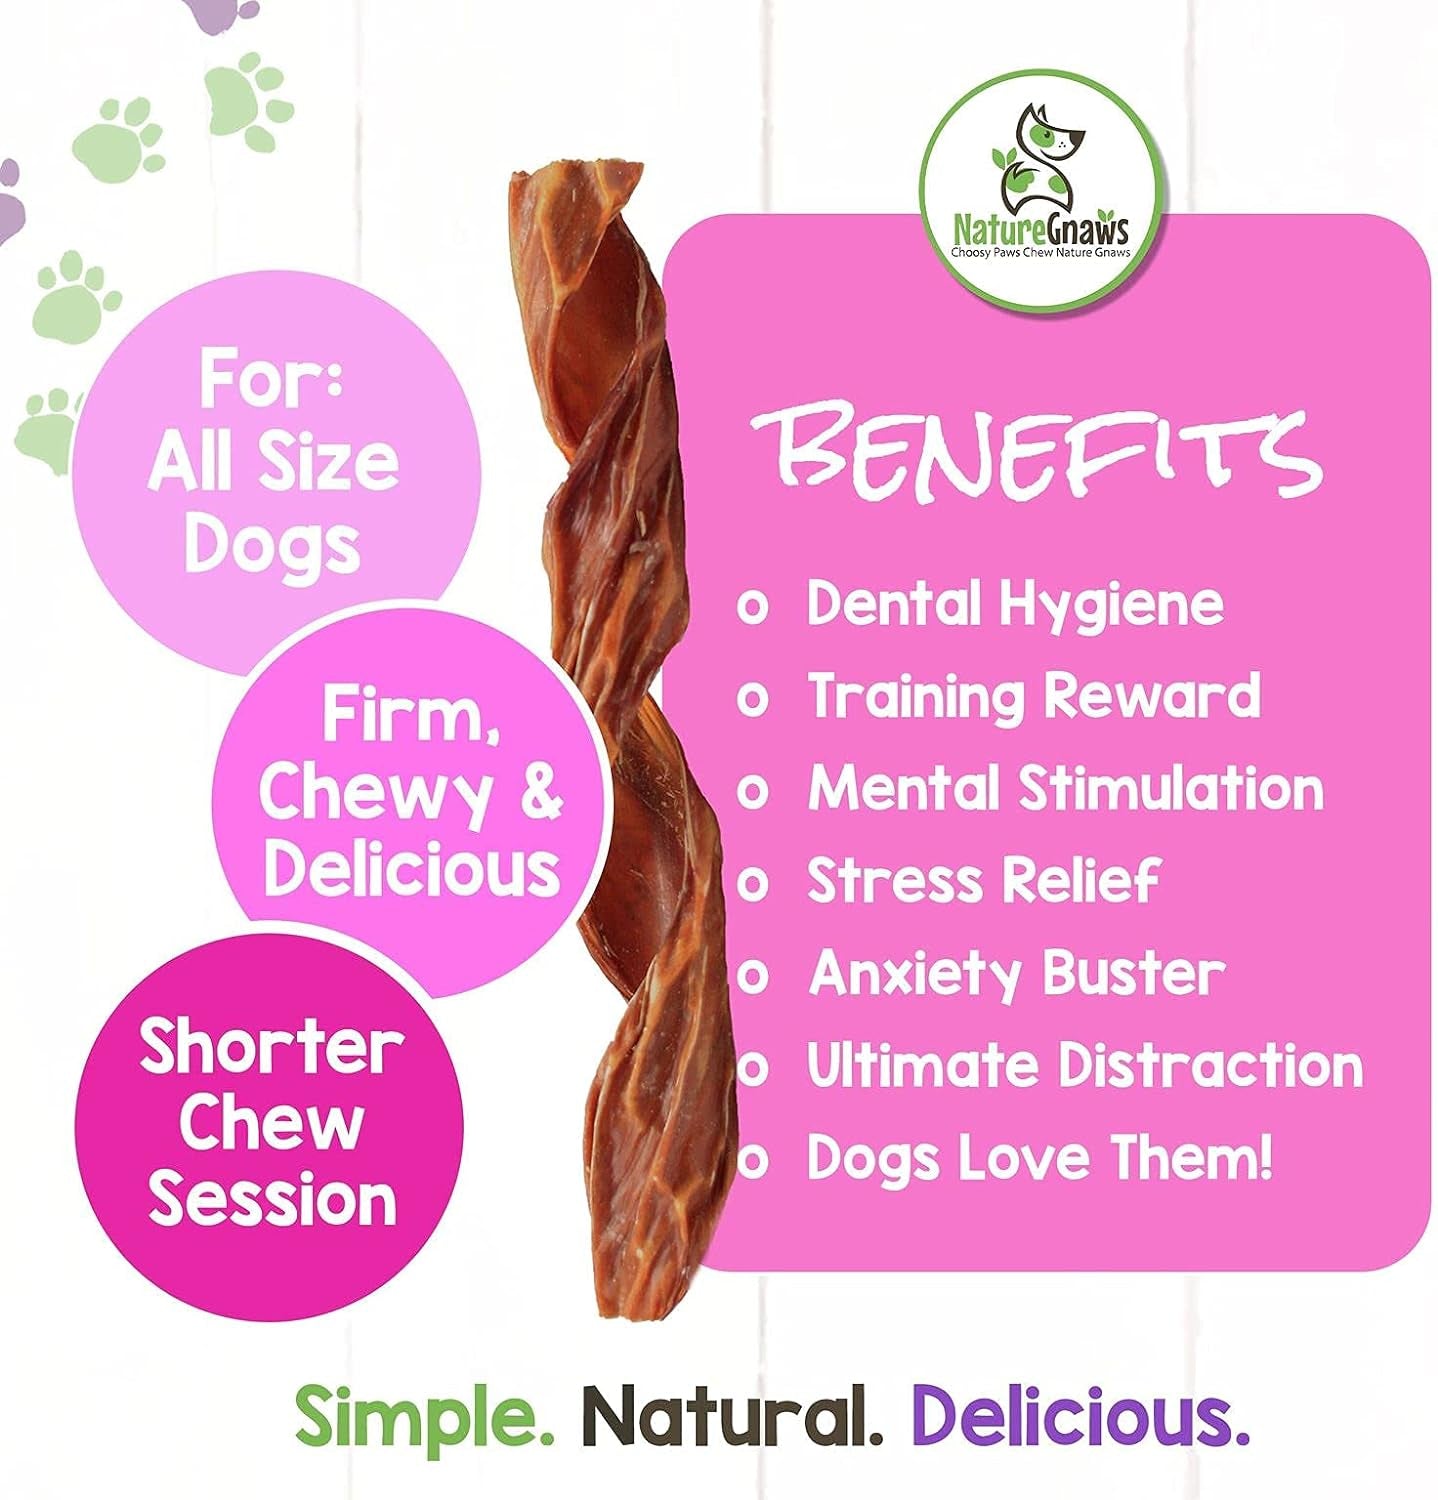 - Beef Jerky Springs for Dogs - Premium Natural Beef Gullet Sticks - Simple Single Ingredient Tasty Dog Chew Treats - Rawhide Free 7-8 Inch